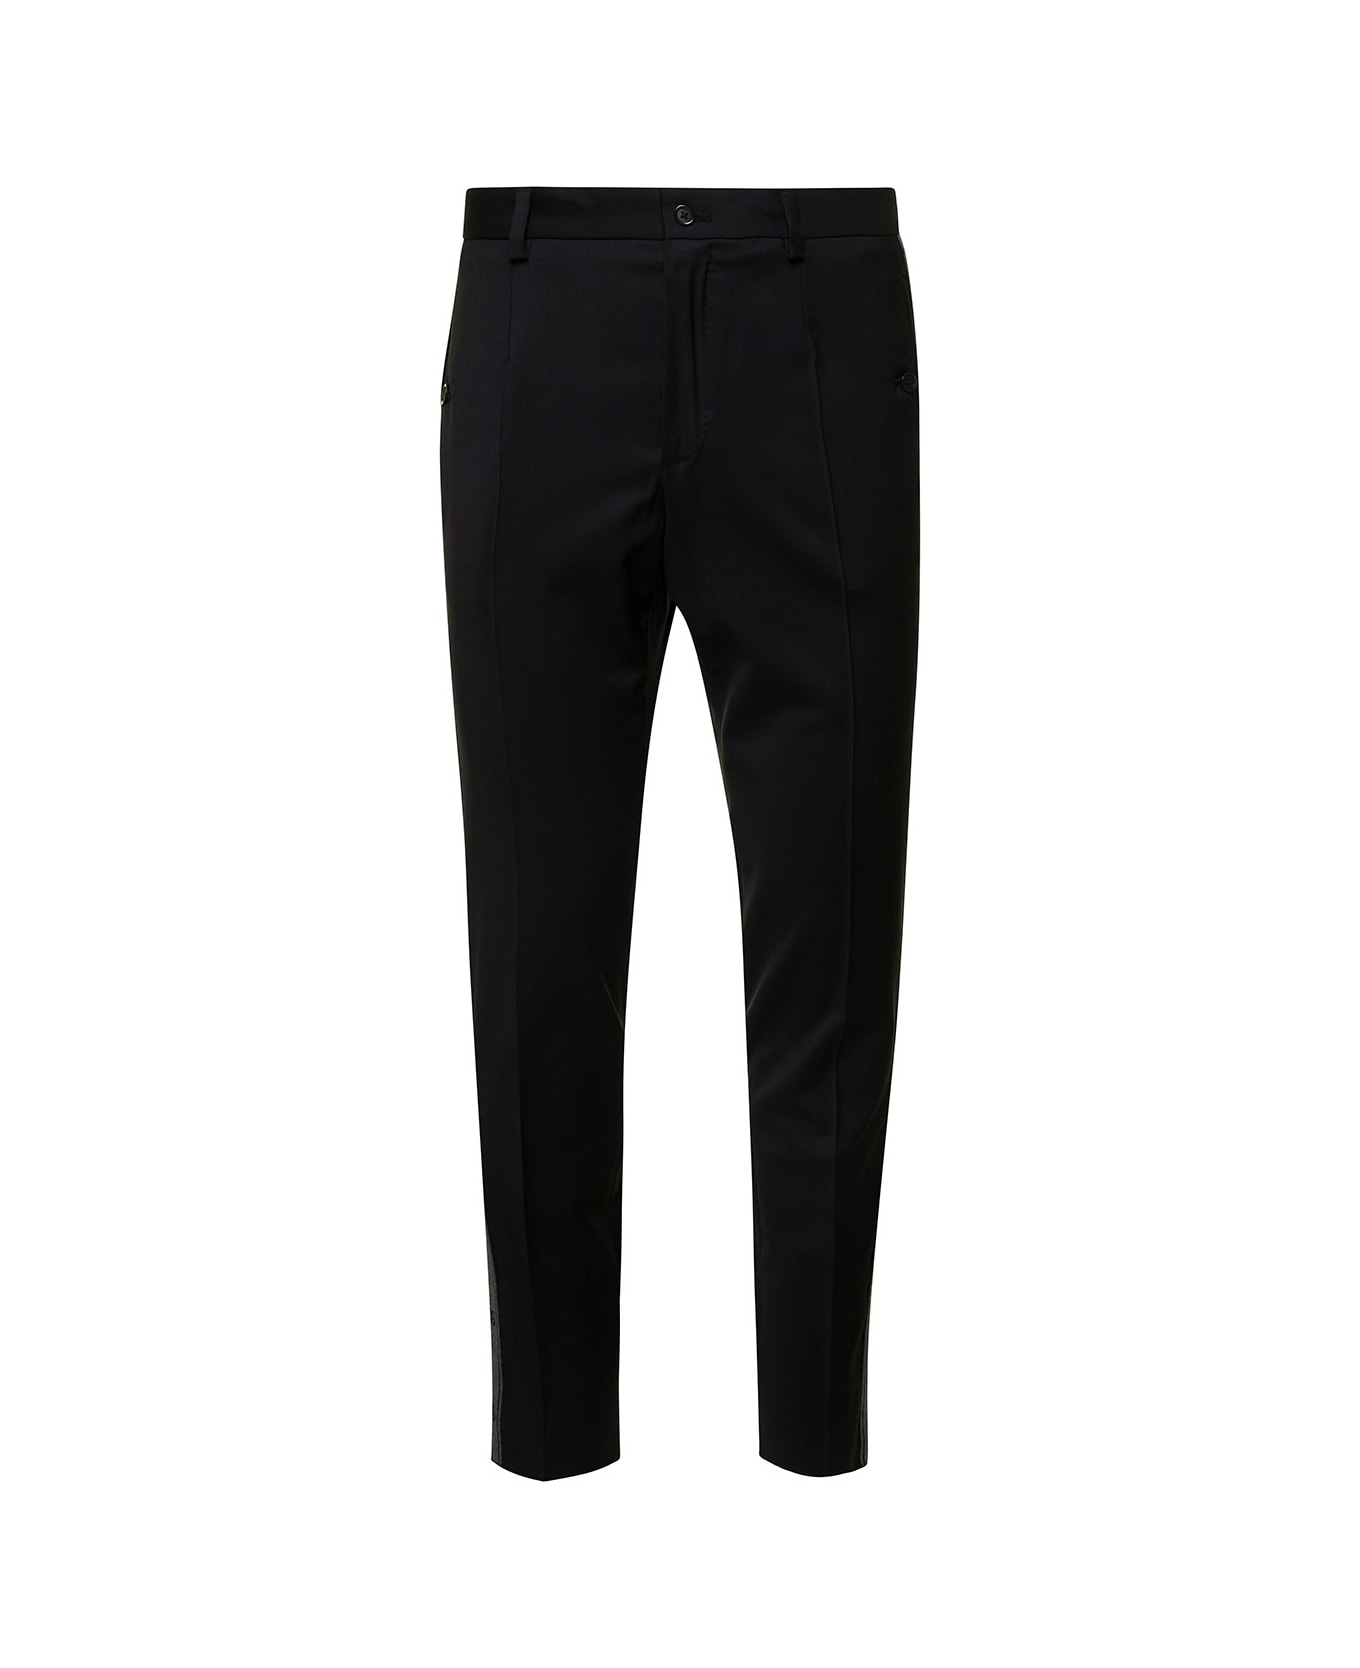 Dolce & Gabbana Black Slim Pants With Contrasting Logo Band In Stretch Wool Man - Black